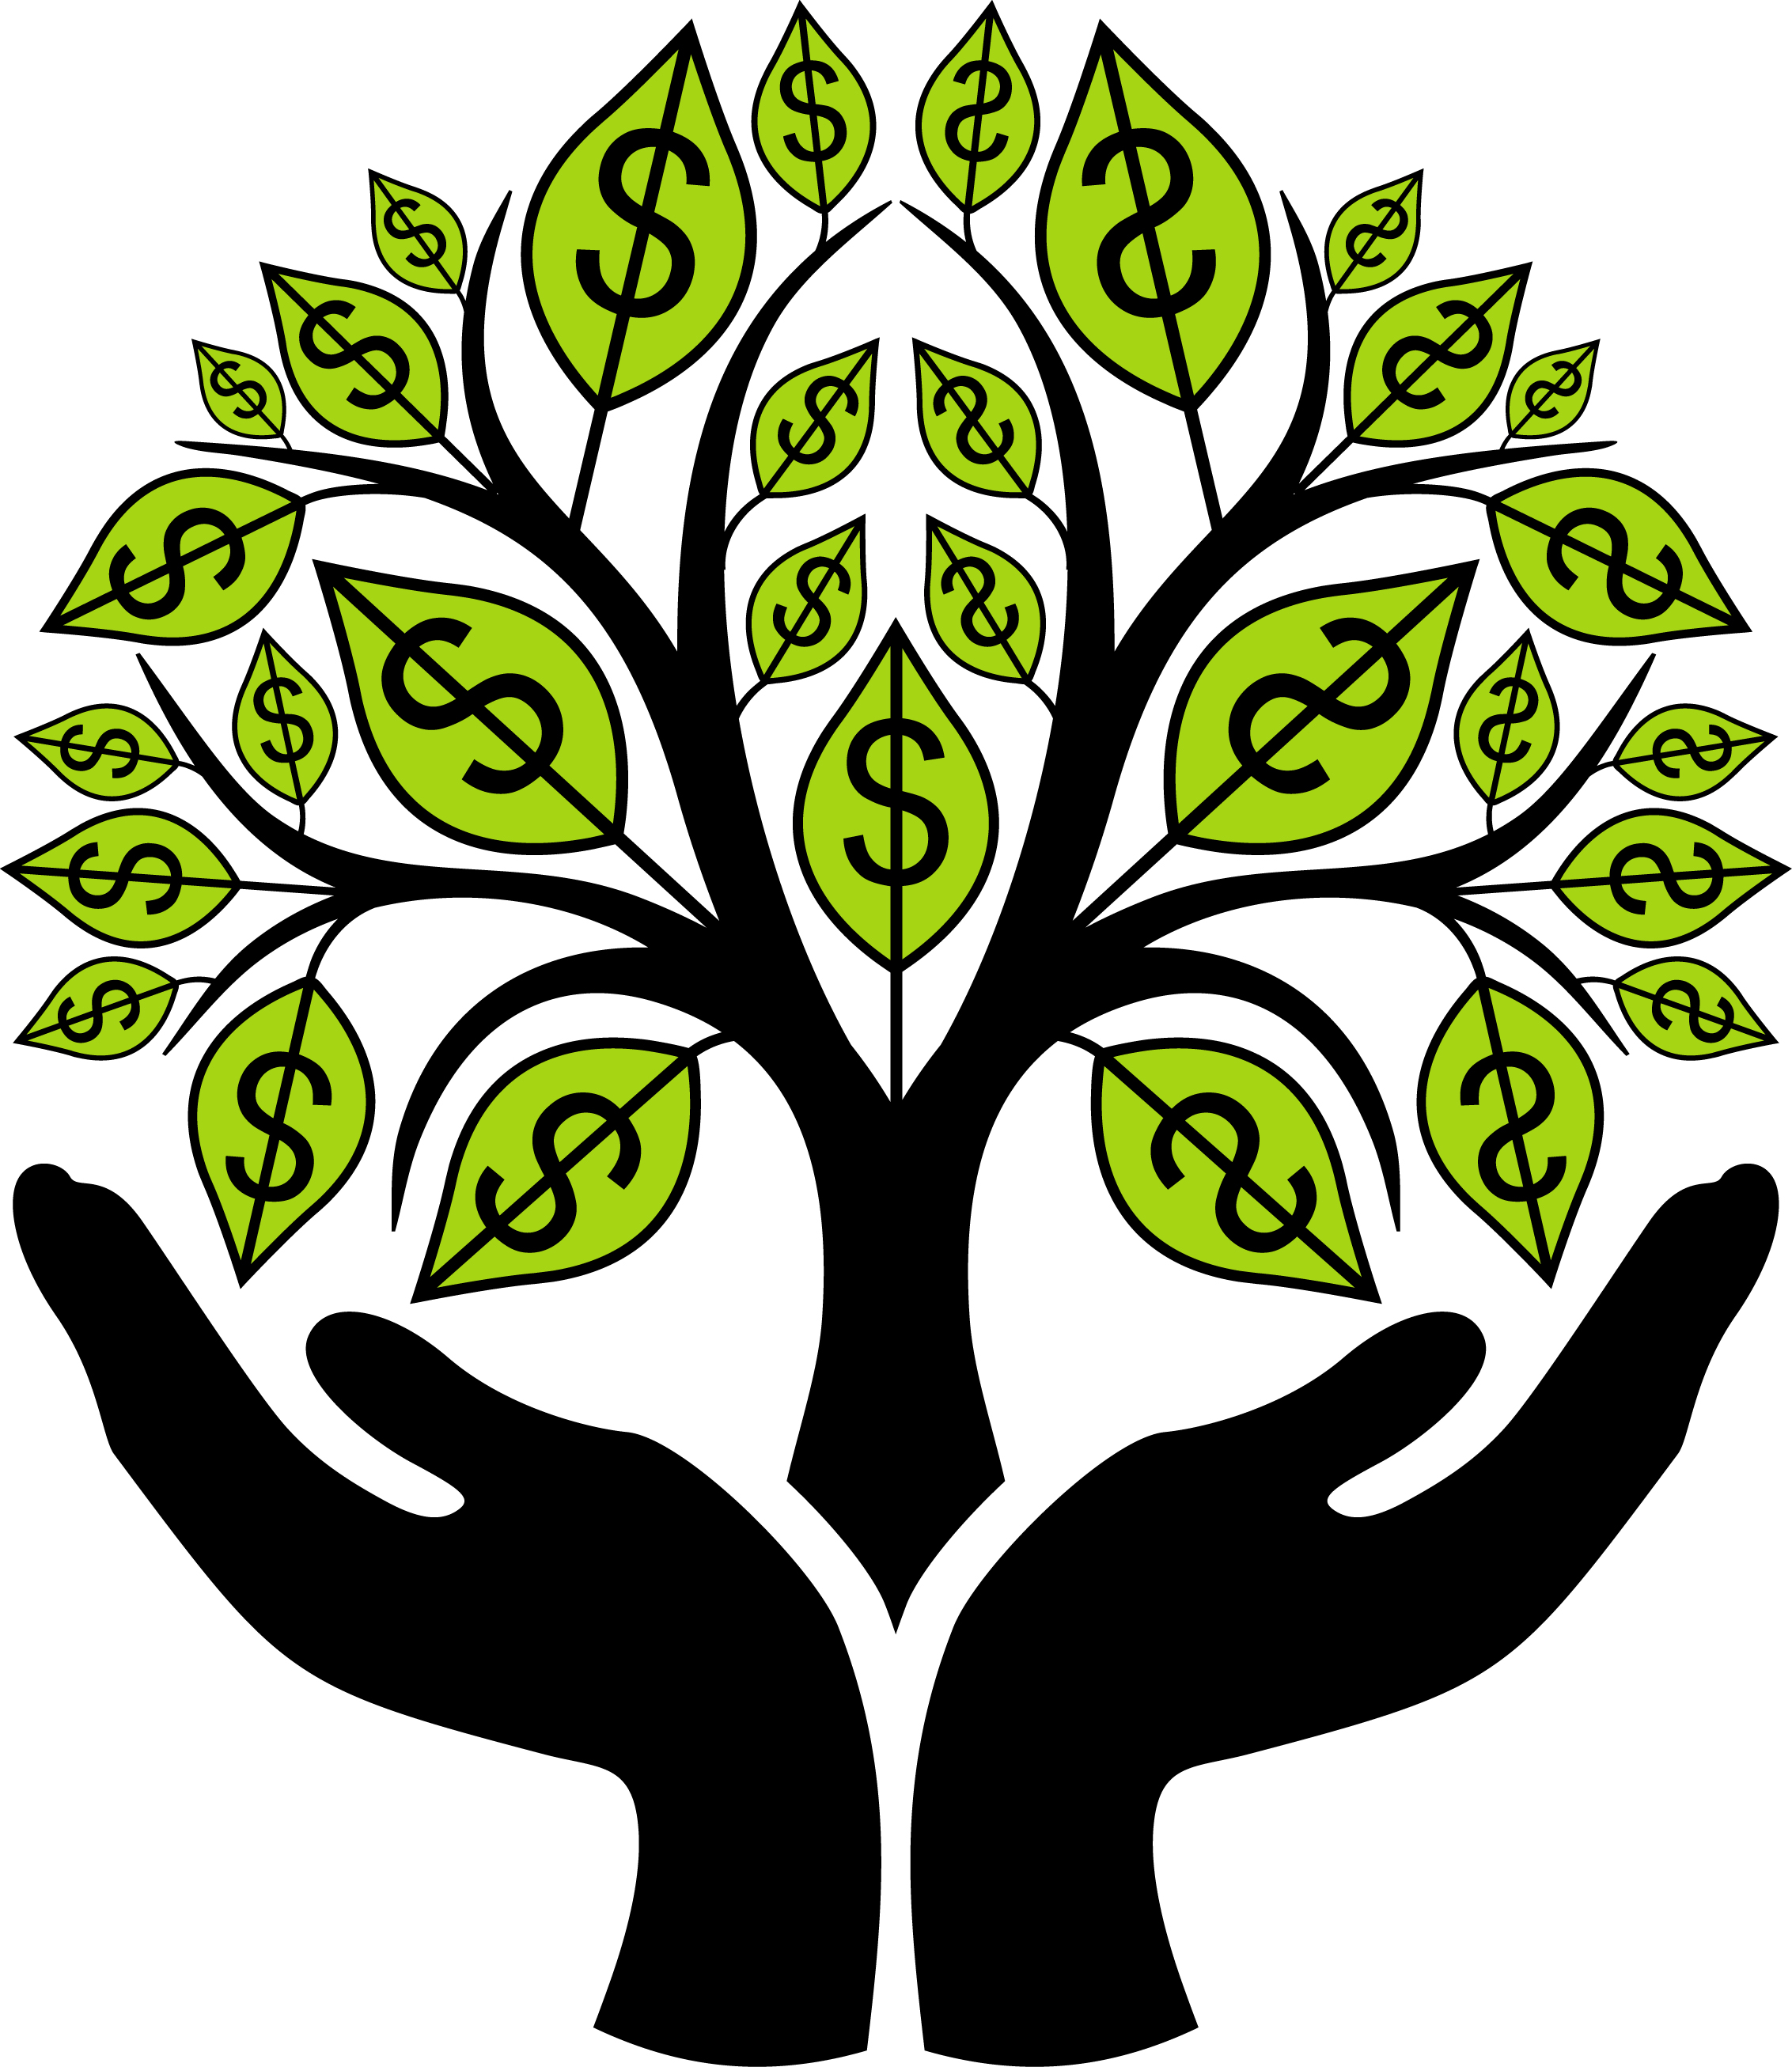 Money growing on a tree, .